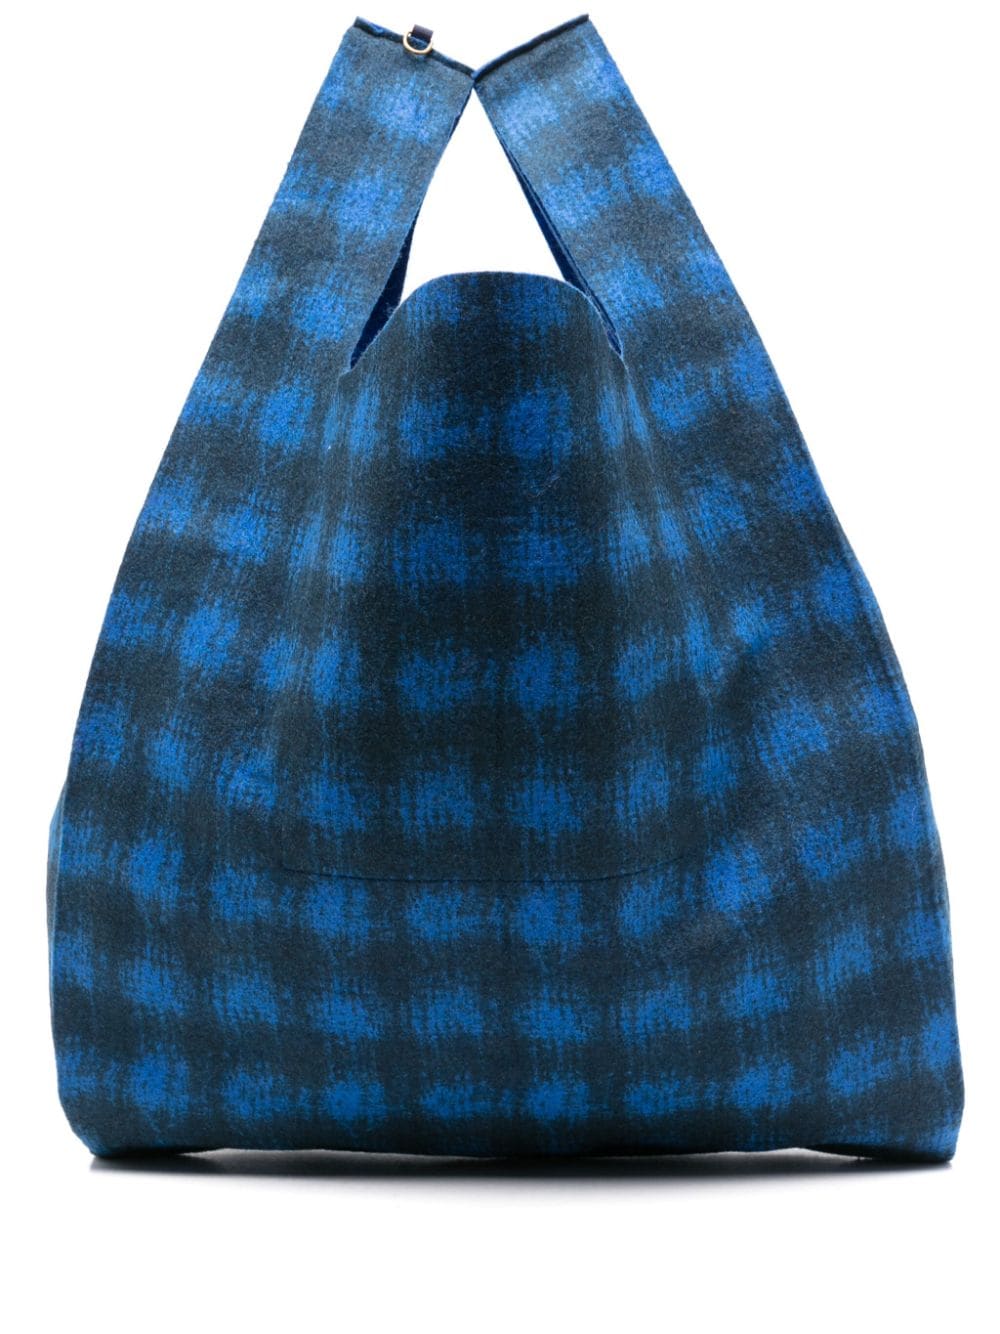 2010s checked tote bag